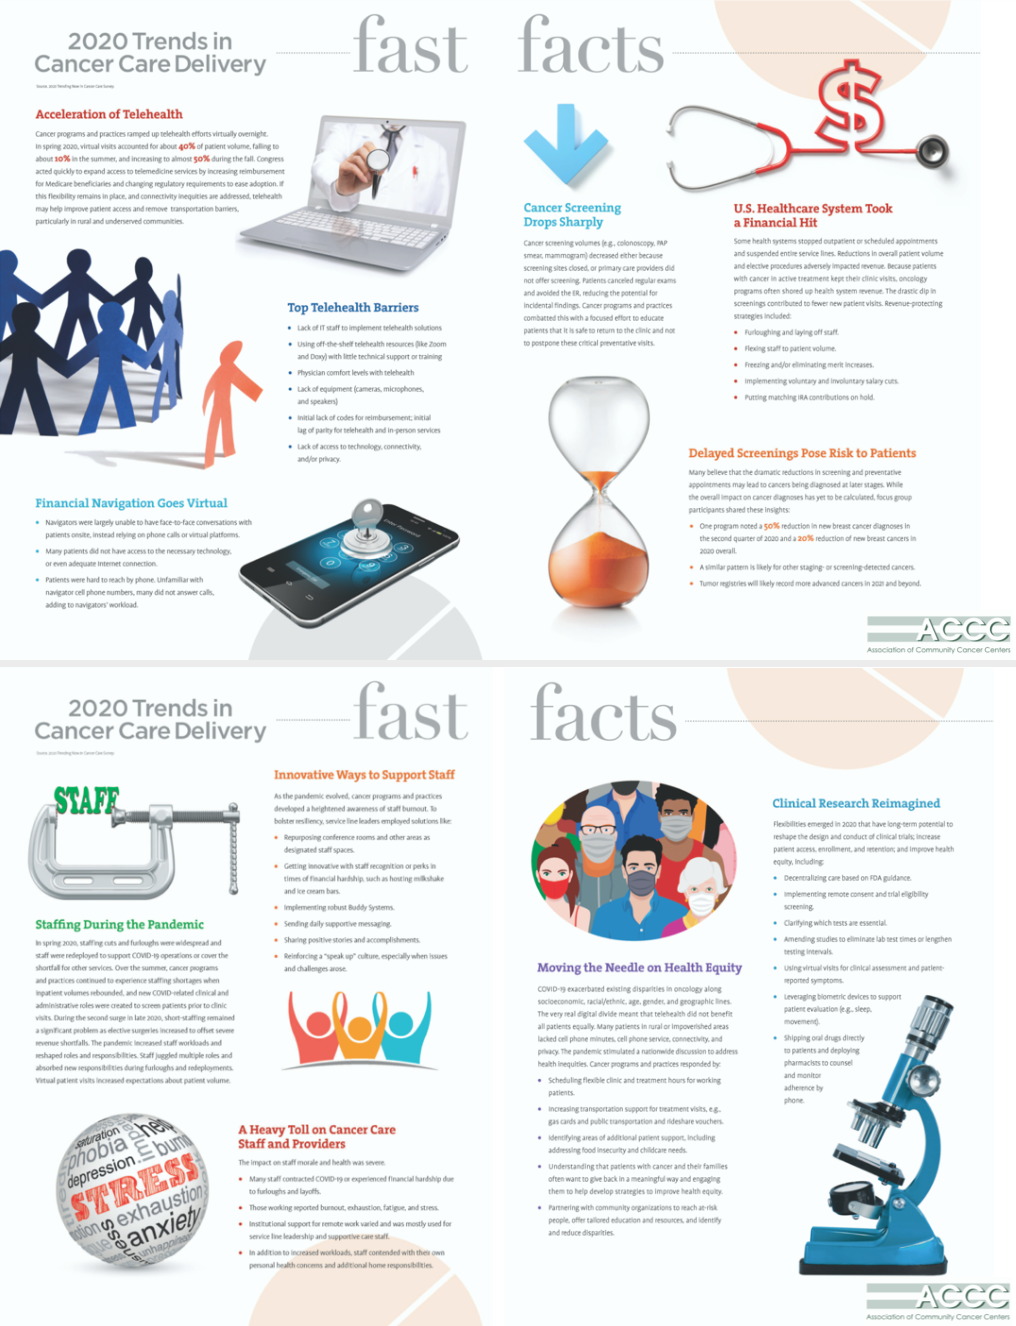 Trends 2020 Fast Facts Duo Infographic